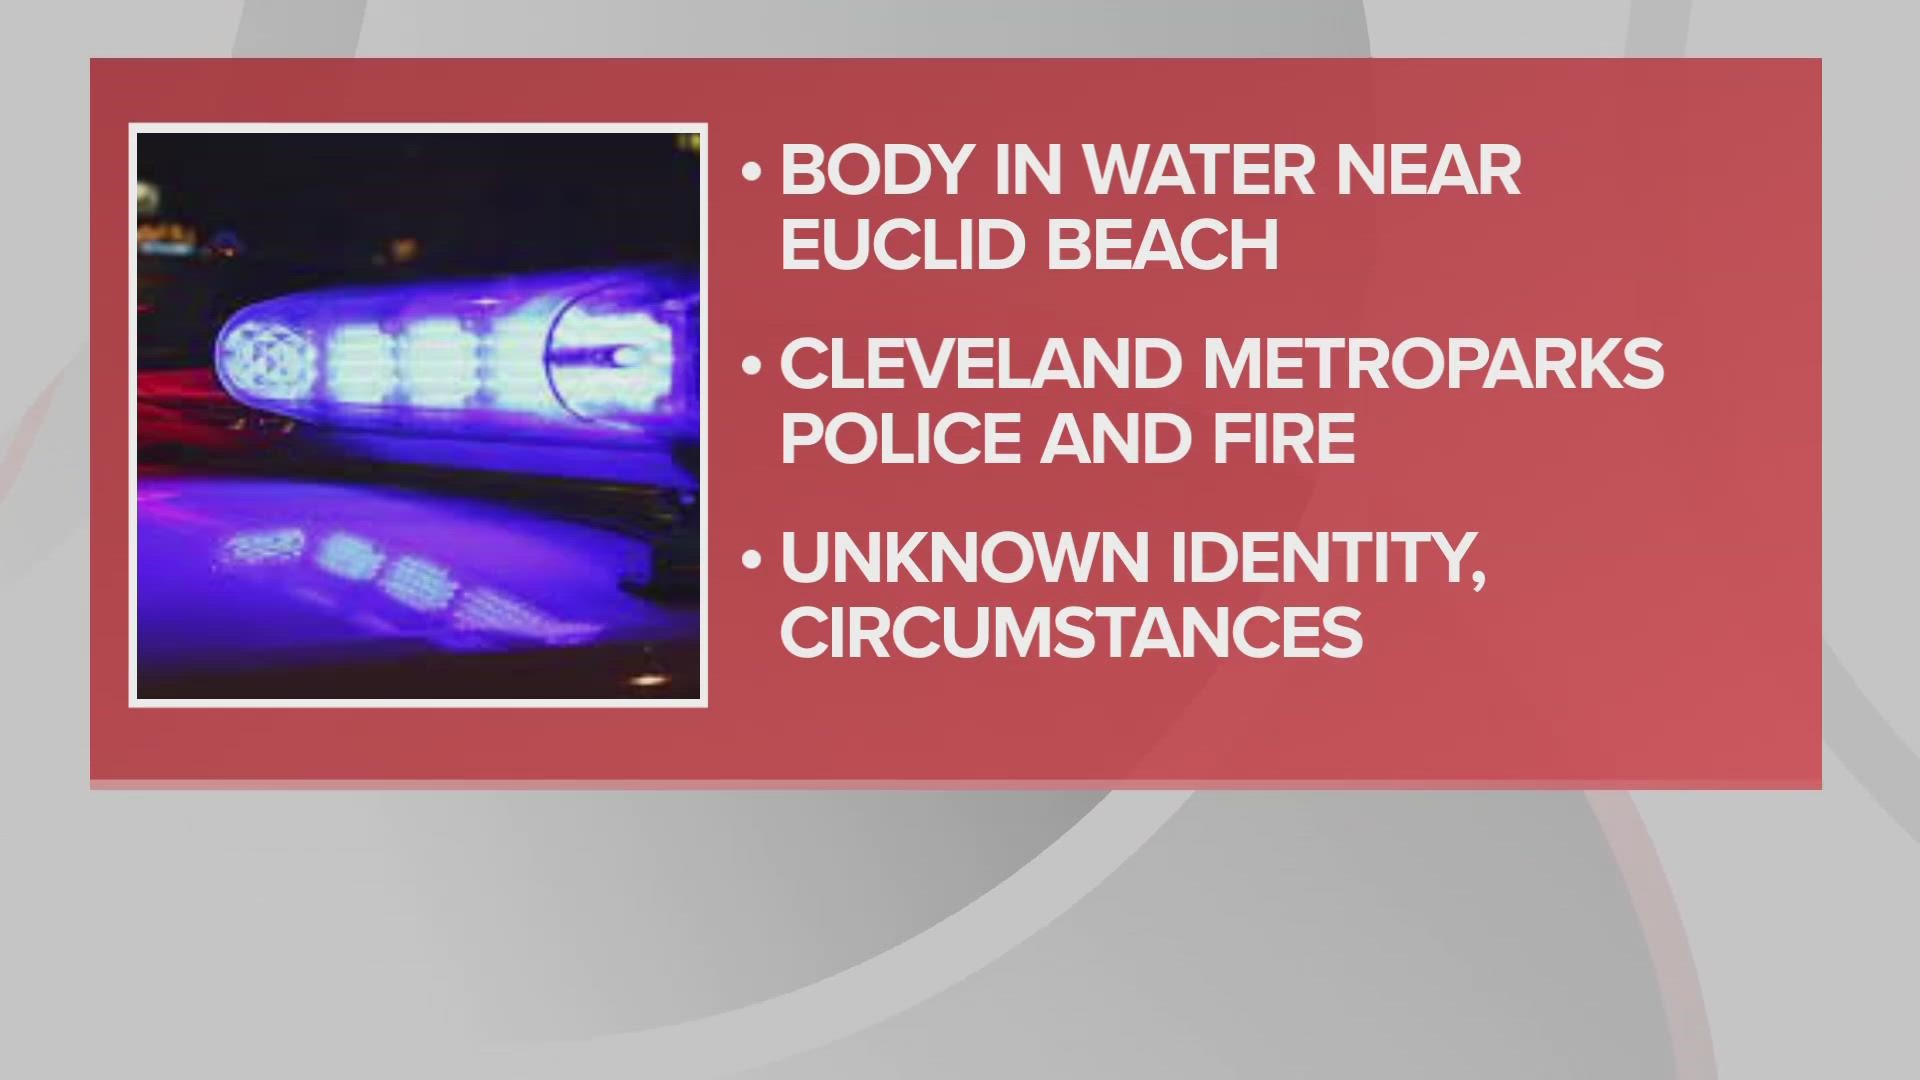 An investigation is underway after a body was found floating in the water at Euclid Beach.